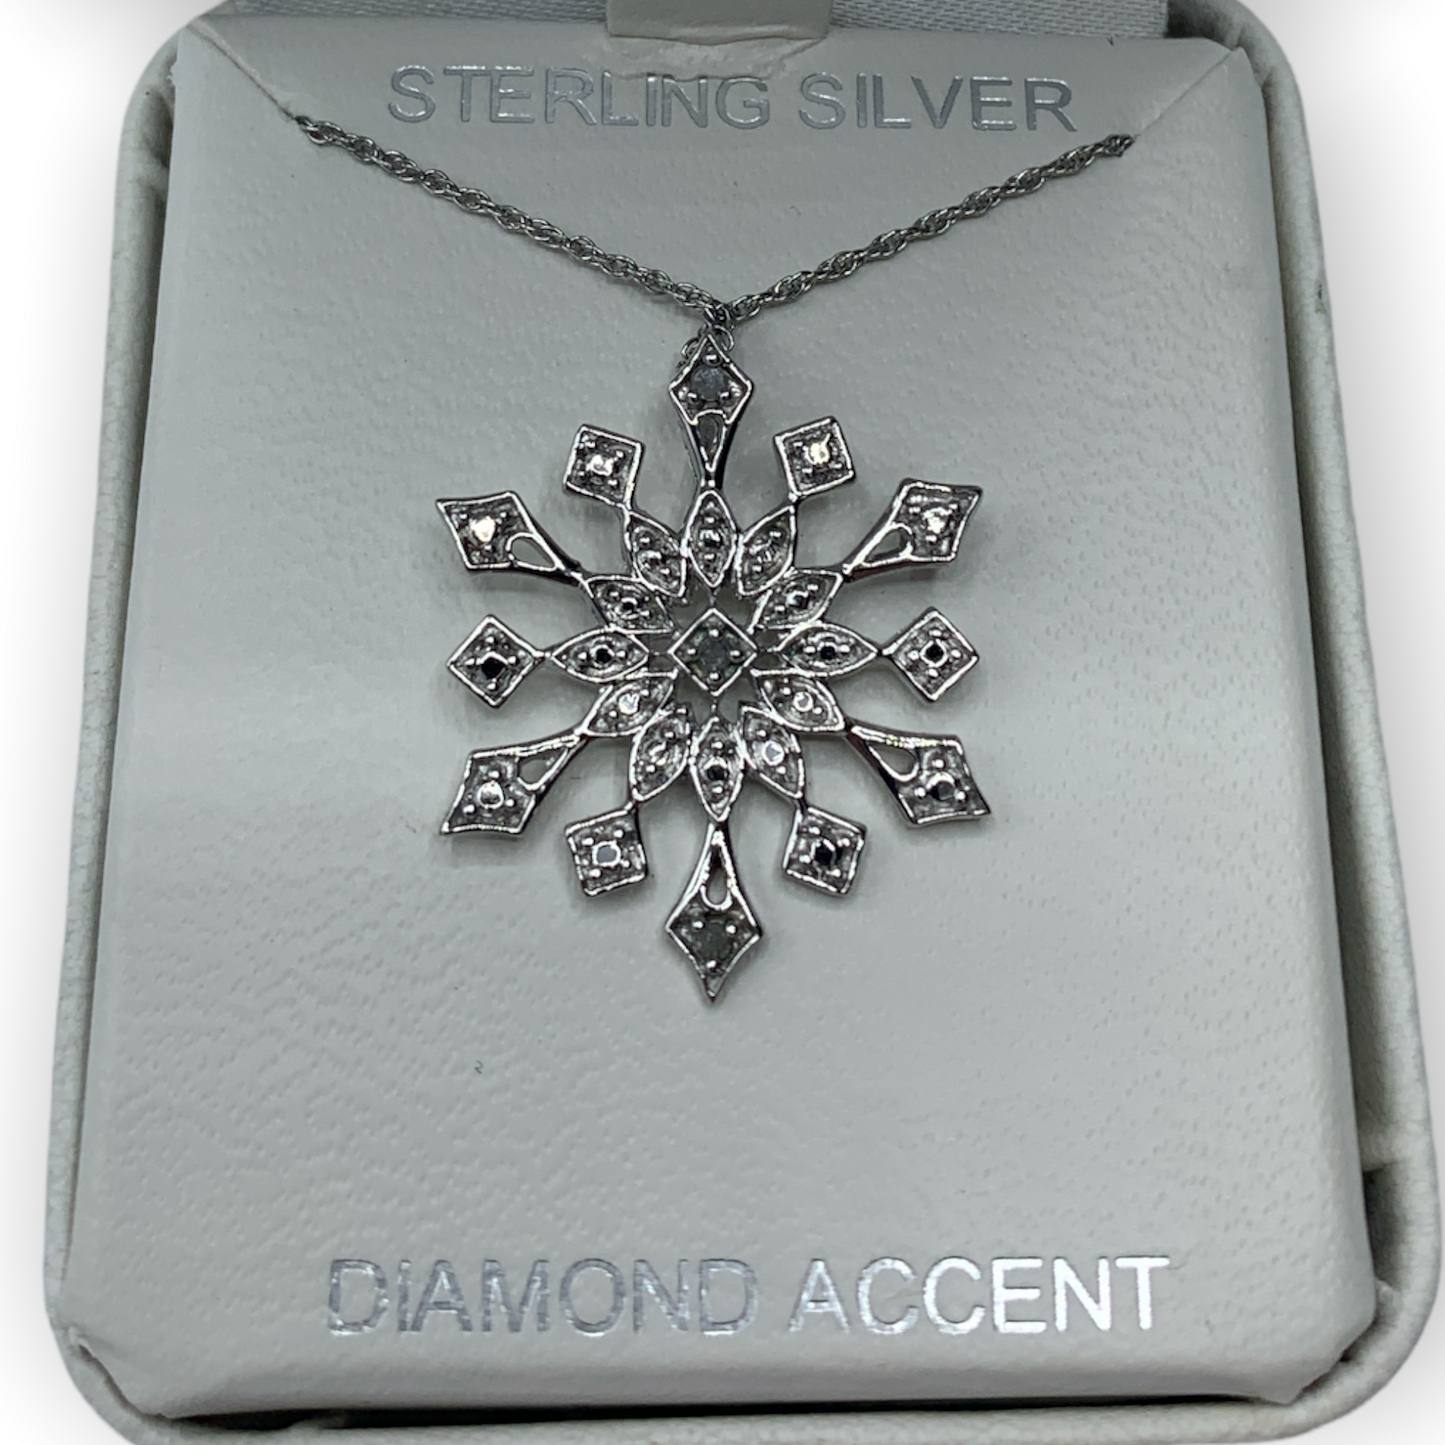 New In Box! Sterling Silver & Diamond Accent Snowflake Necklace. 18” Chain